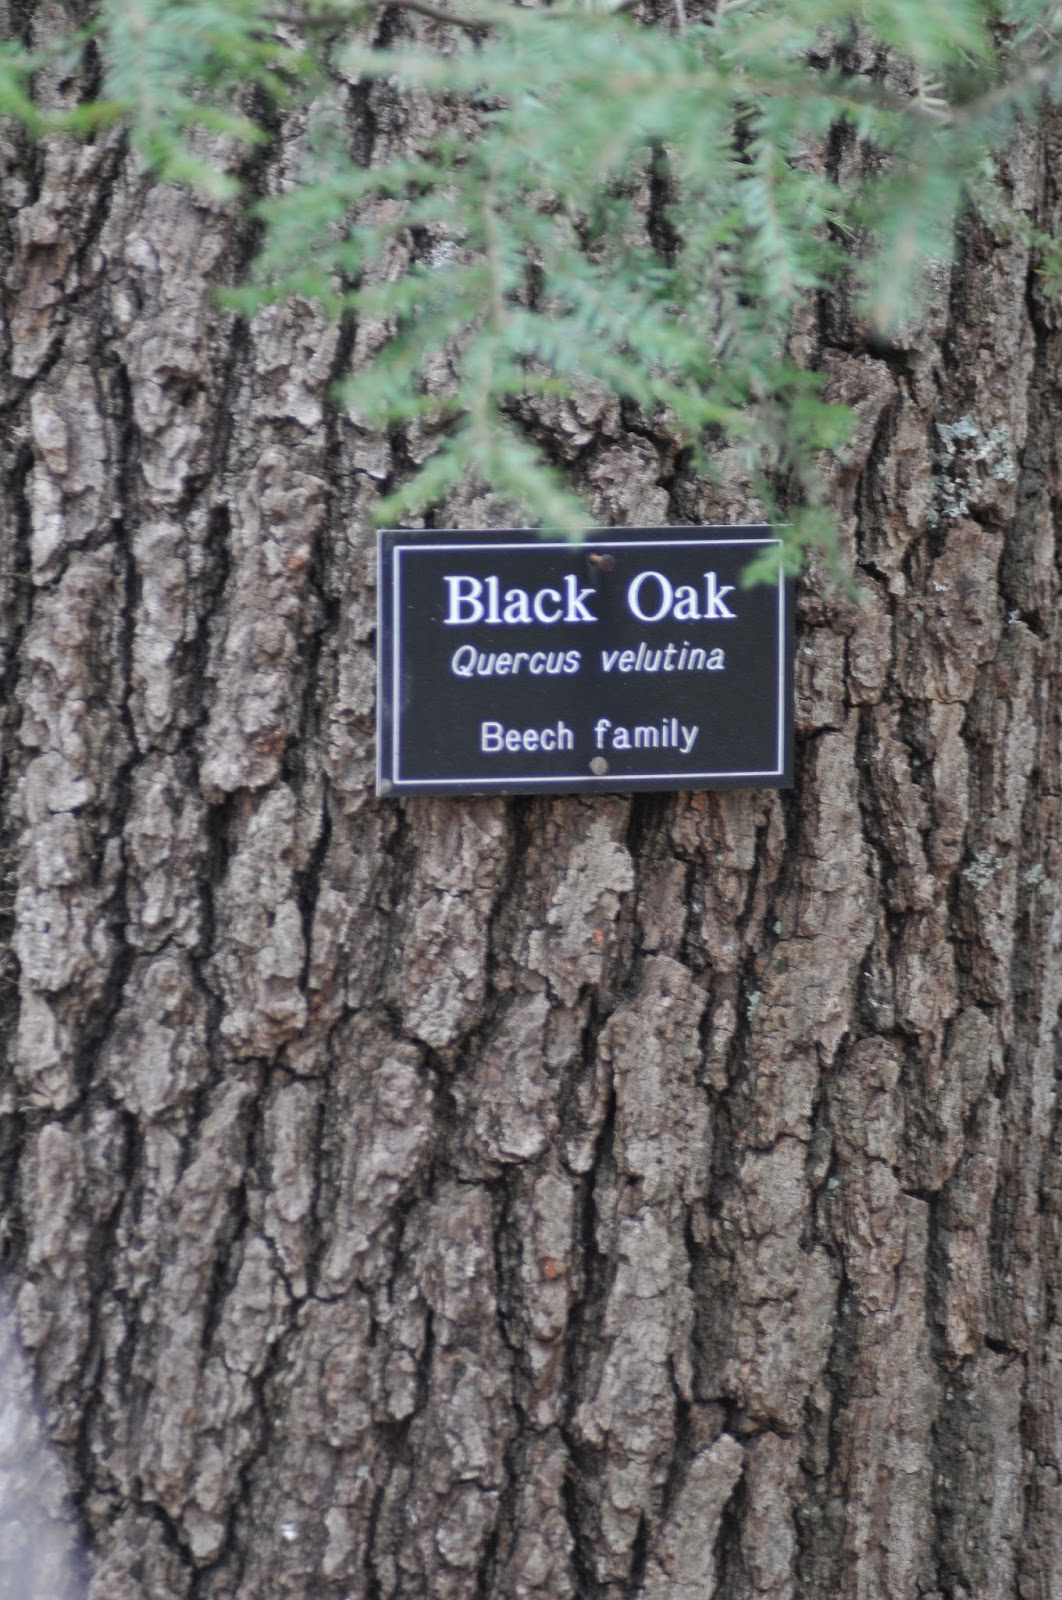 A Year With the Trees: Black Oak - Quercus velutina